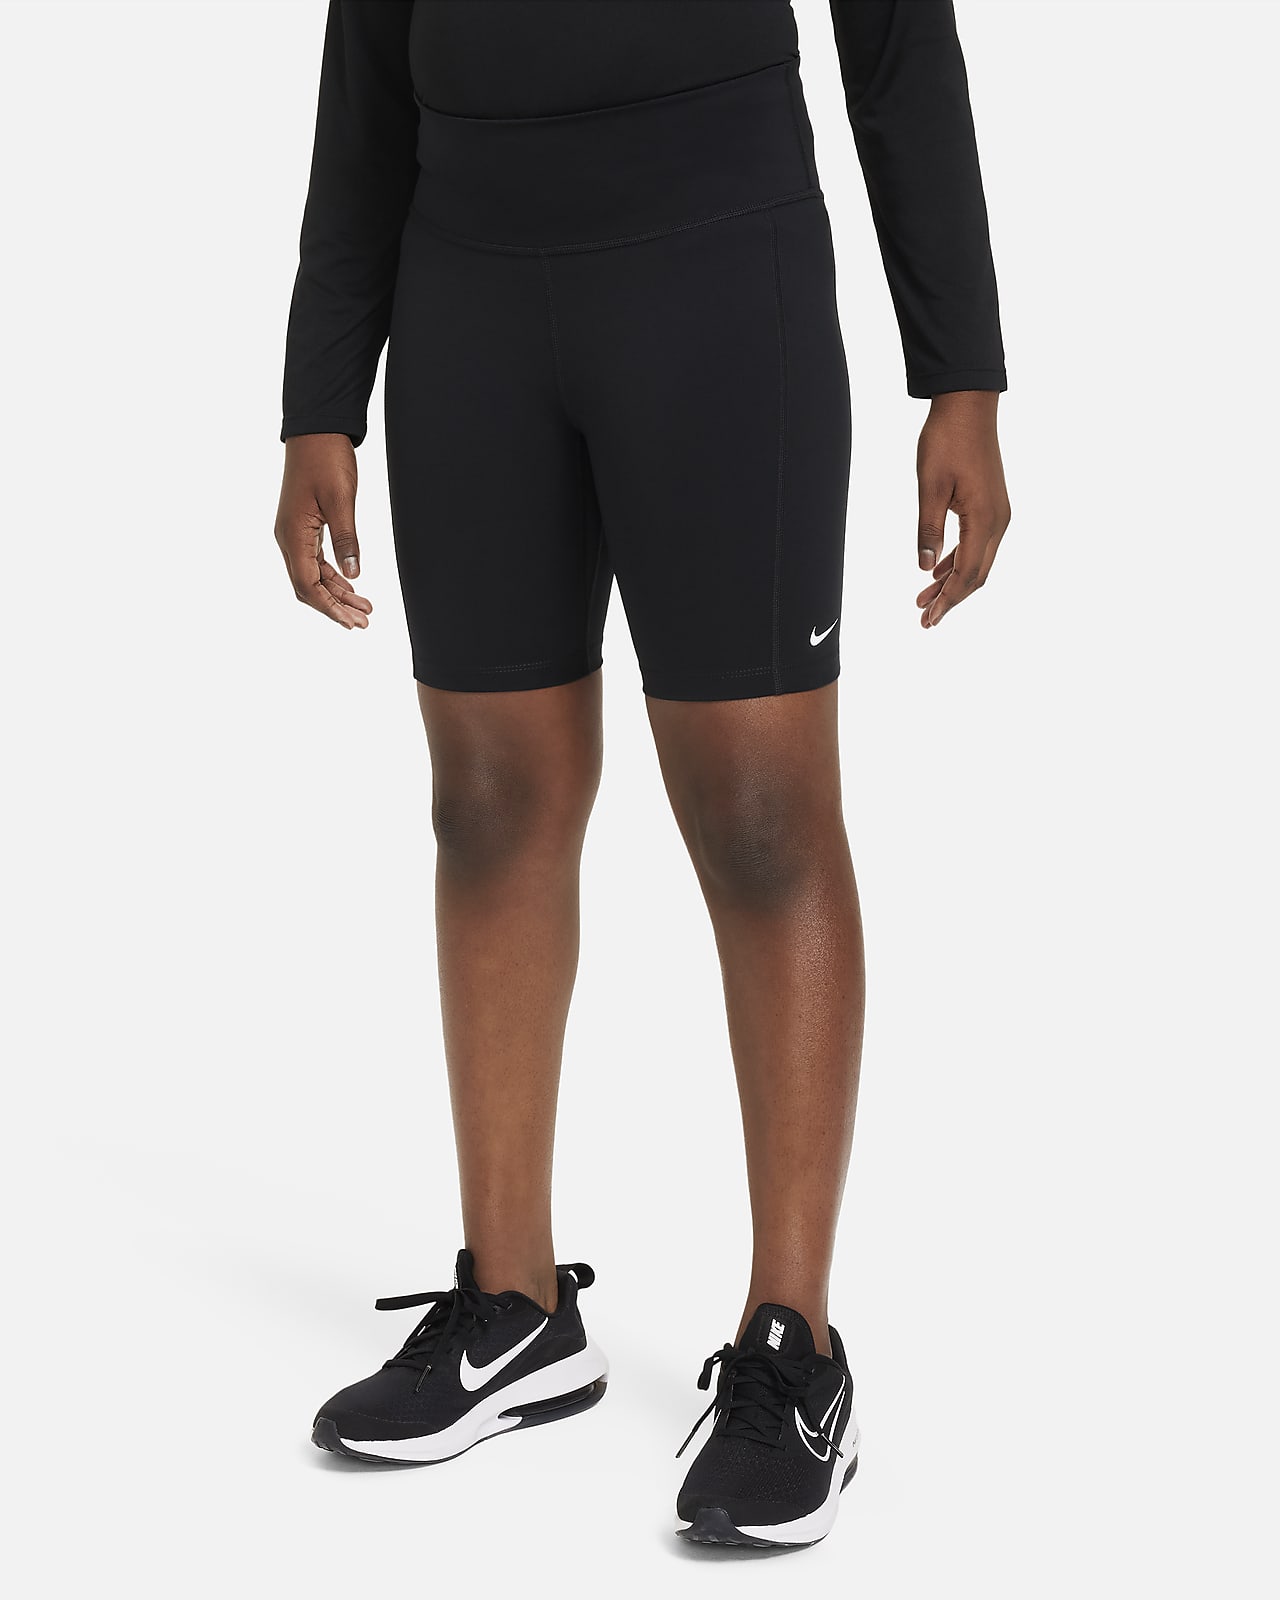 The Nike Pro Shorts are versatile and extremely comfortable